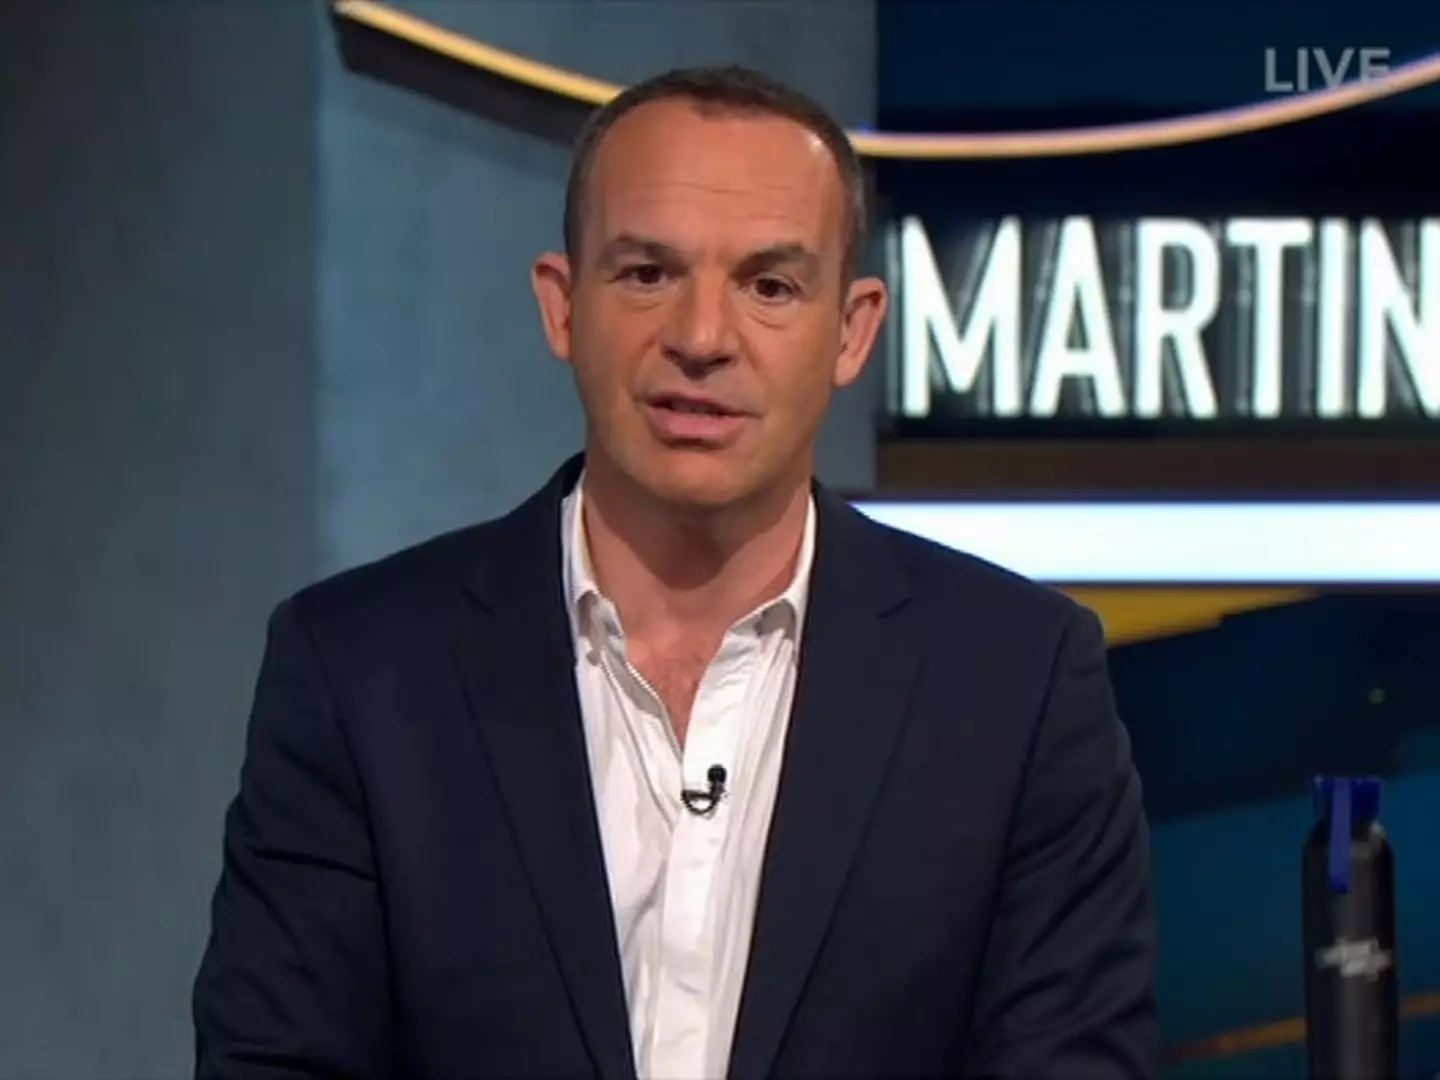 Martin Lewis recommended Brits go through their wallet if they wanted to save some money.